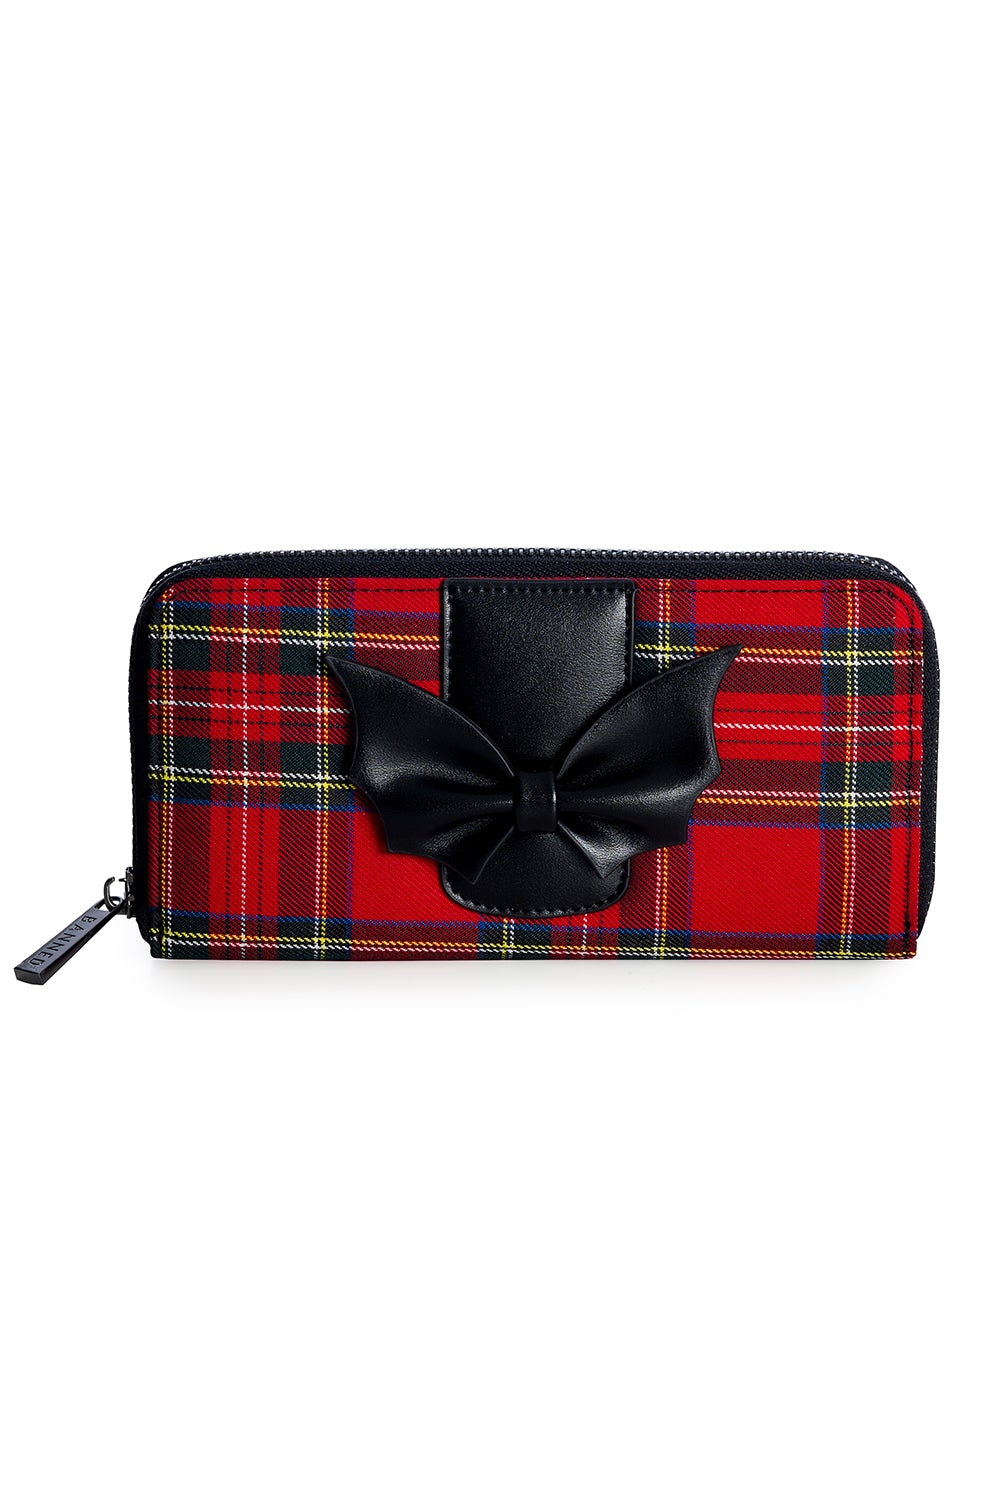 Red tartan print purse with bat styled bow detail on the front. 